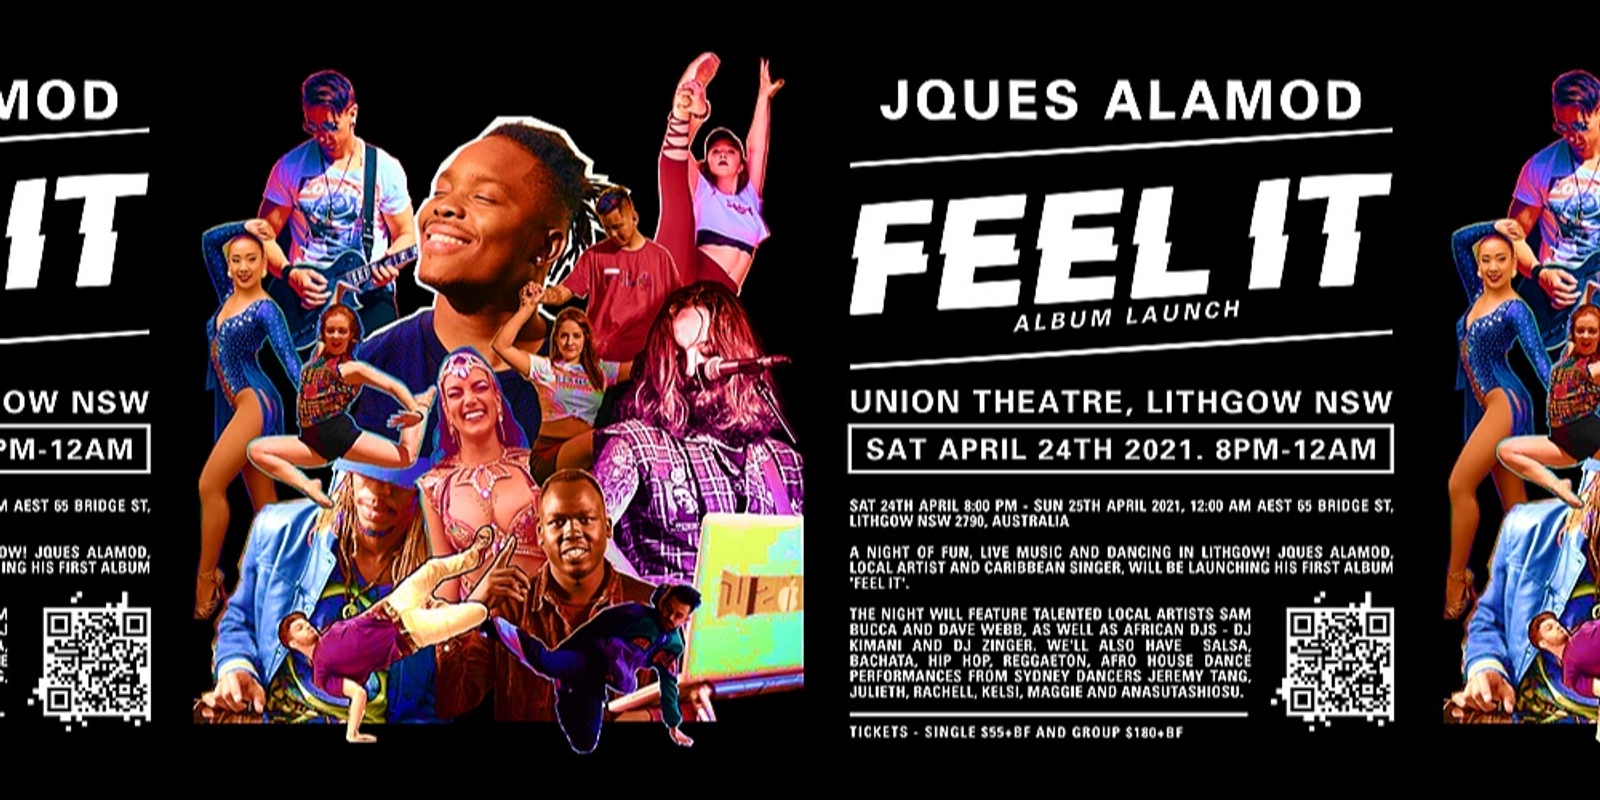 Banner image for LITHGOW'S BIGGEST NIGHT: JQUE'S ALAMOD'S 'FEEL IT' ALBUM LAUNCH. 3 SINGERS, 2 OF SYDNEY'S BEST AFRICAN DJS, 1 DANCE GROUP